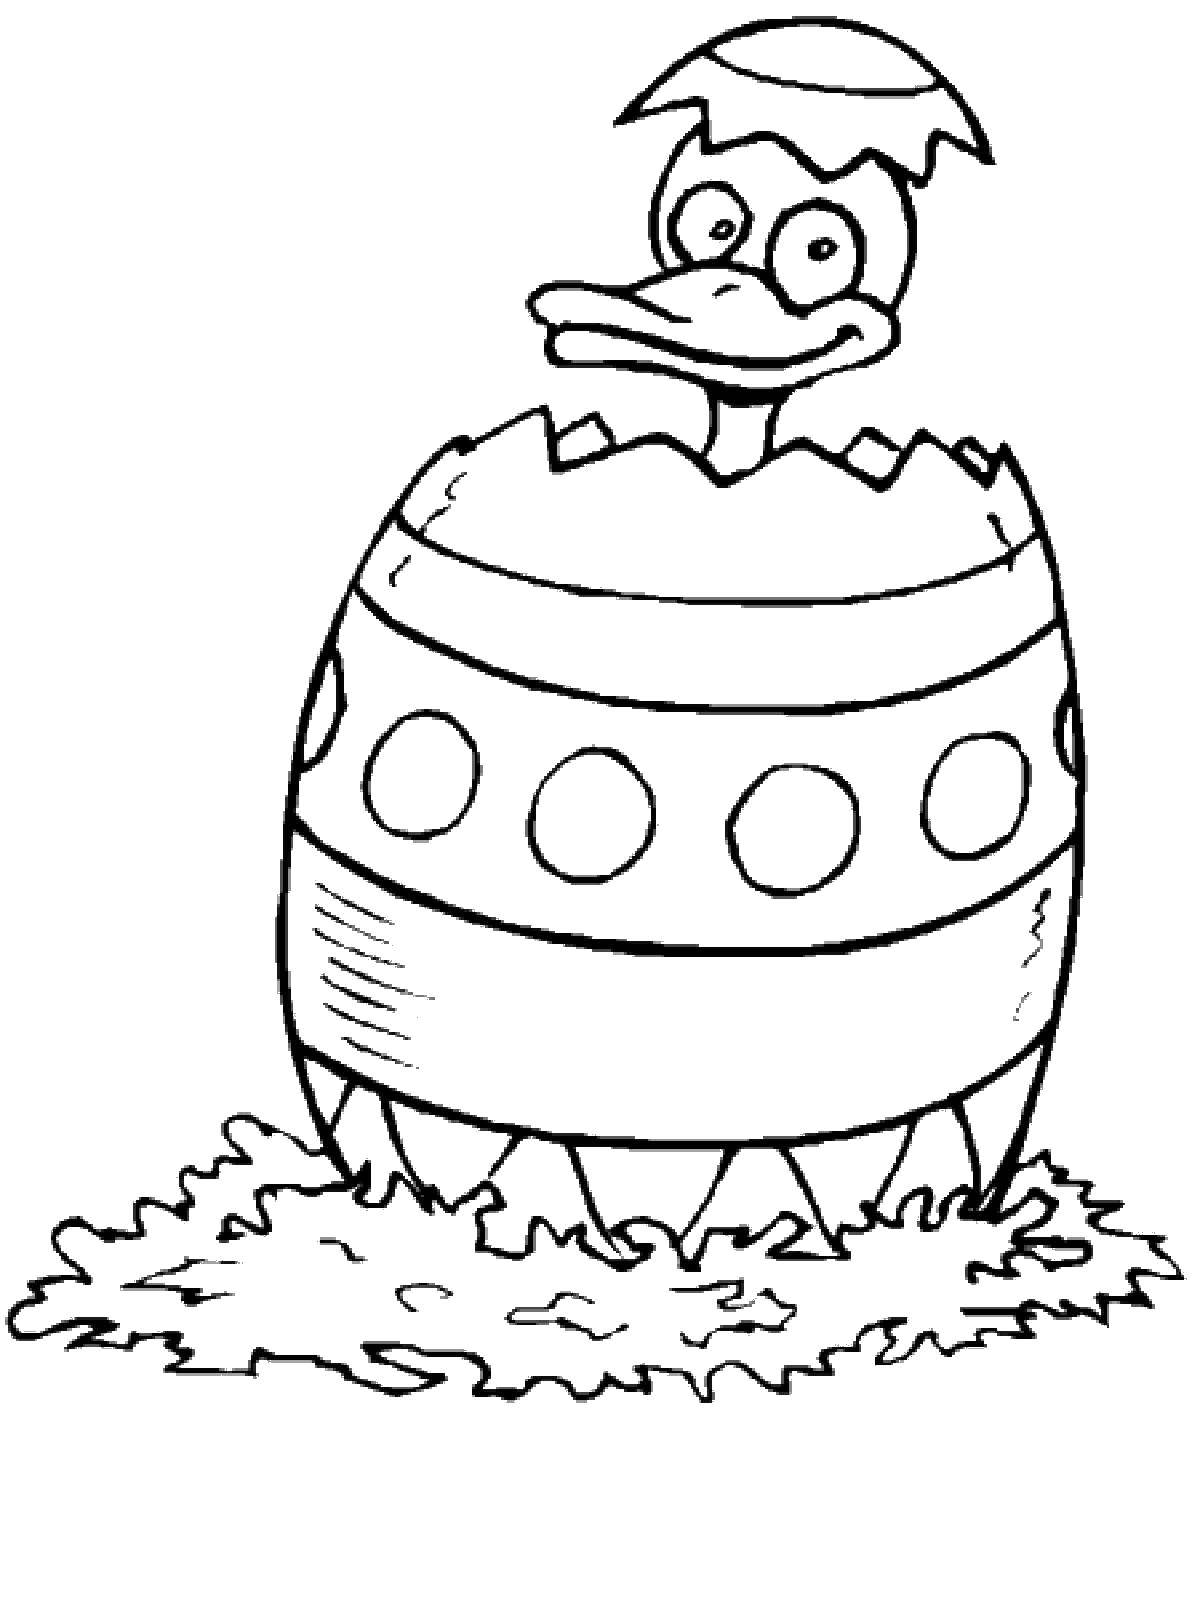 Coloring Duck in Easter egg. Category coloring Easter. Tags:  duck, Easter.